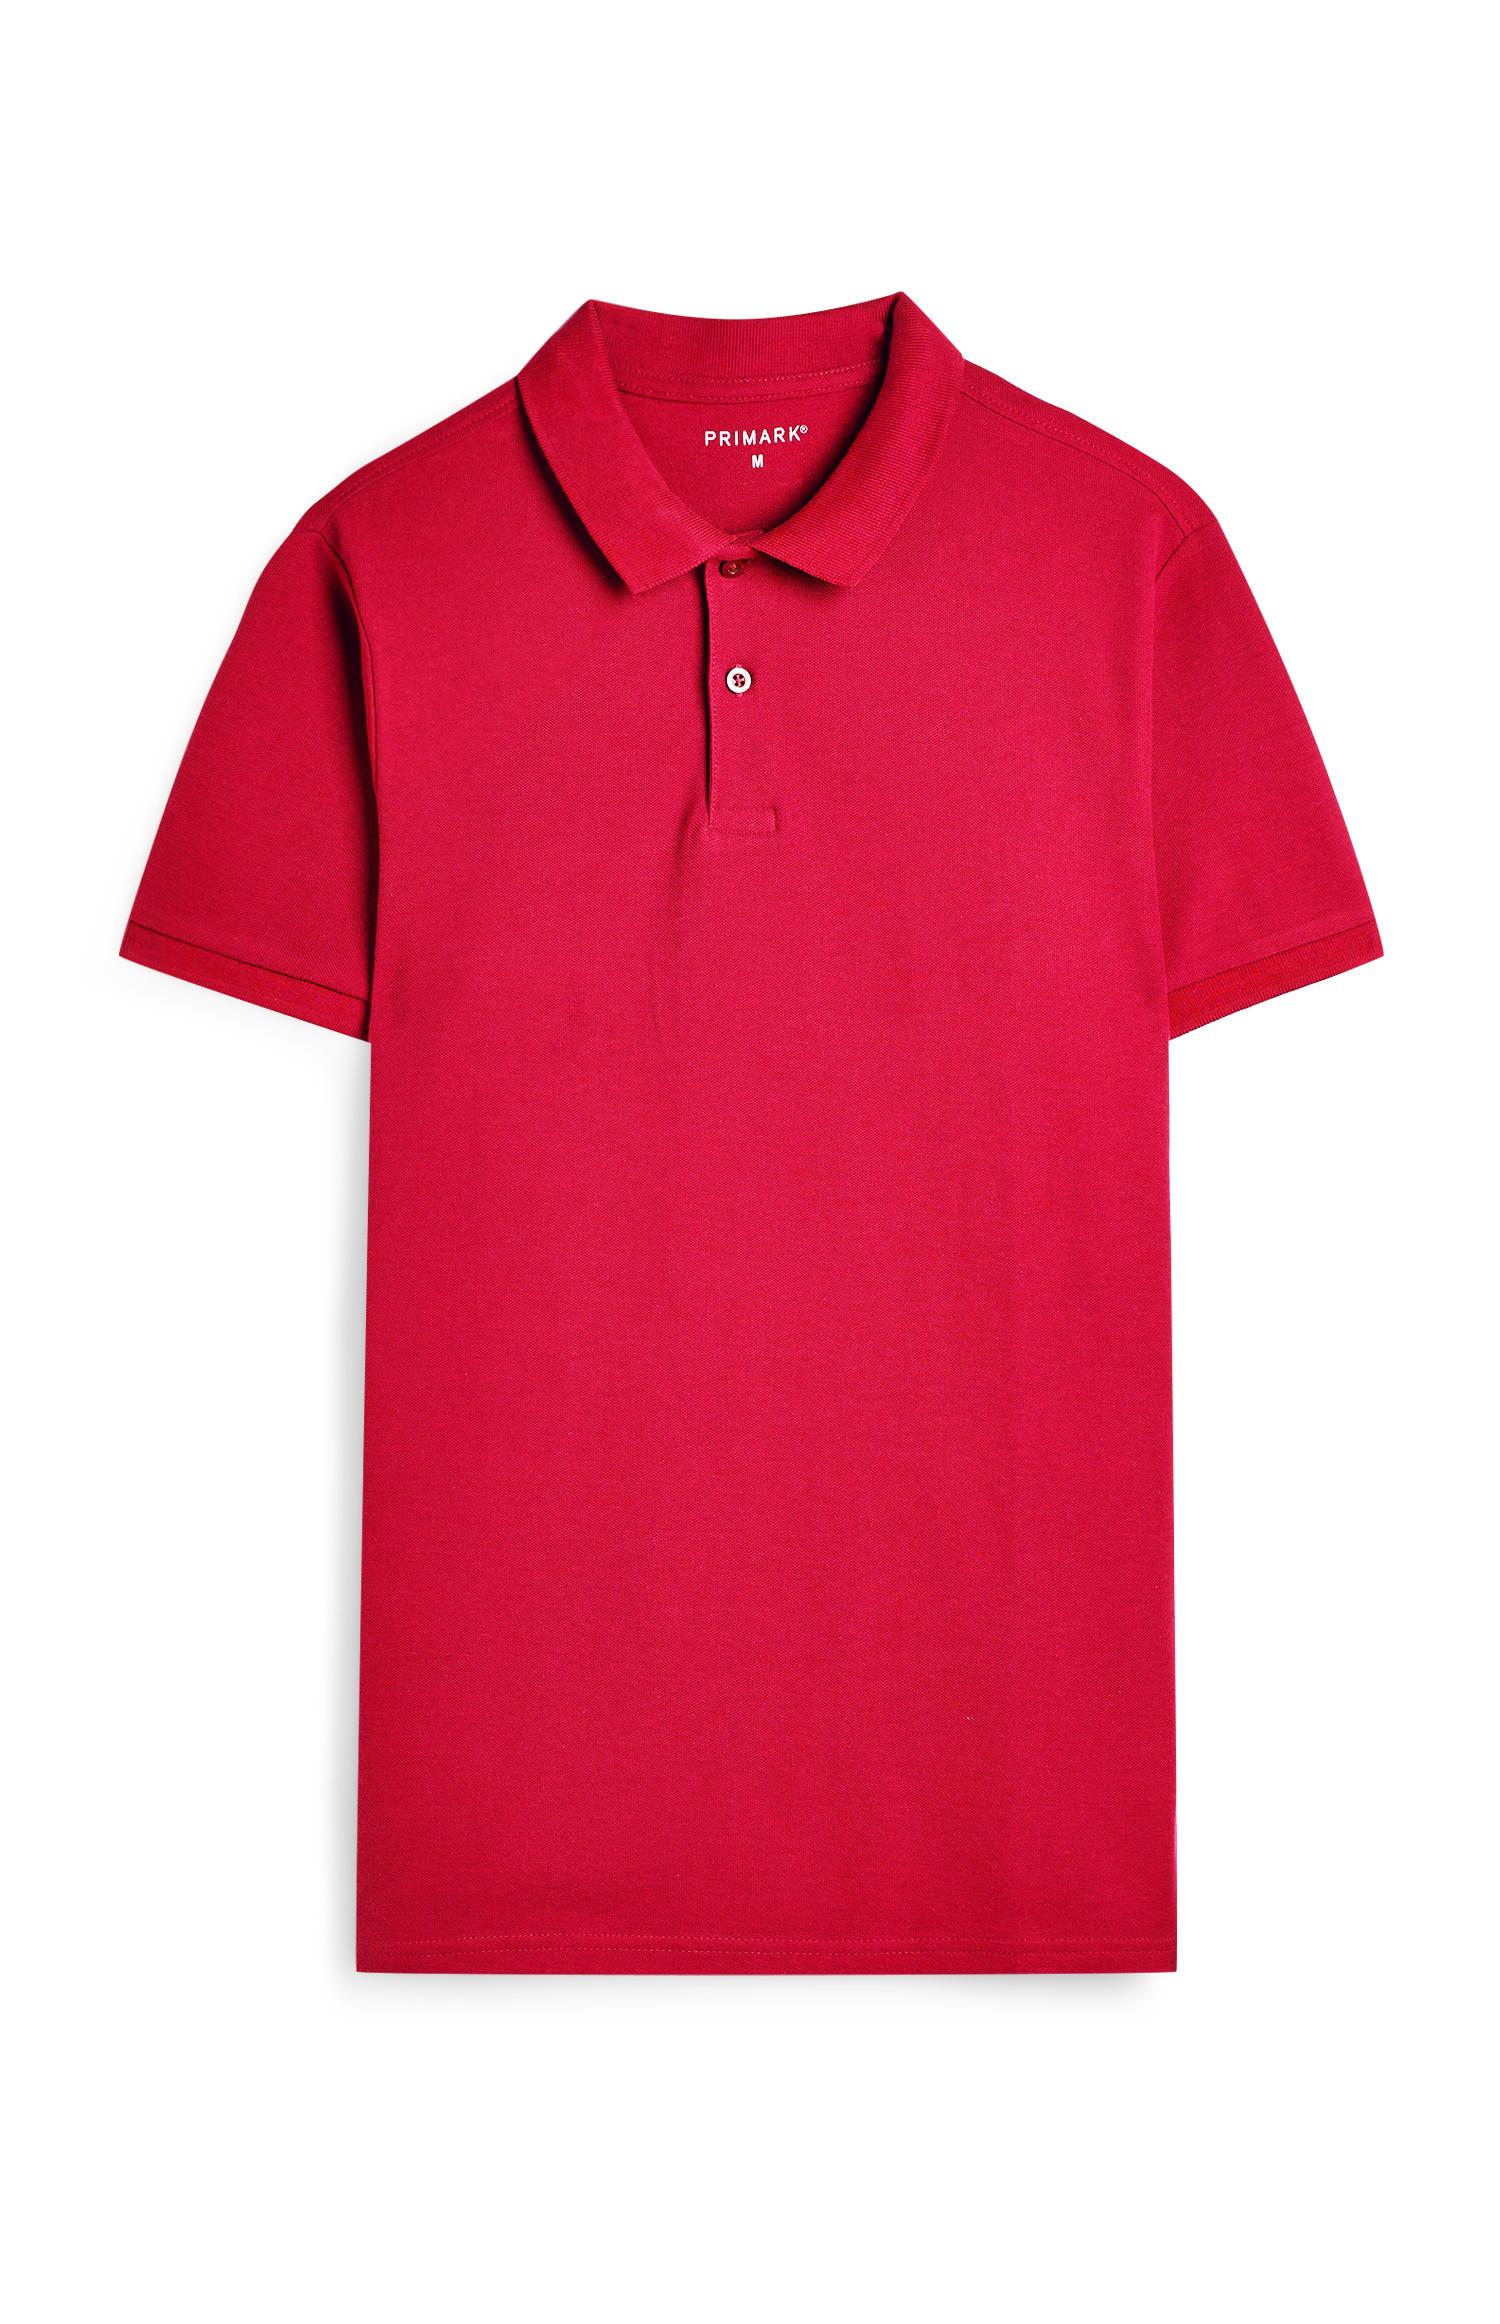 primark red polo shirt